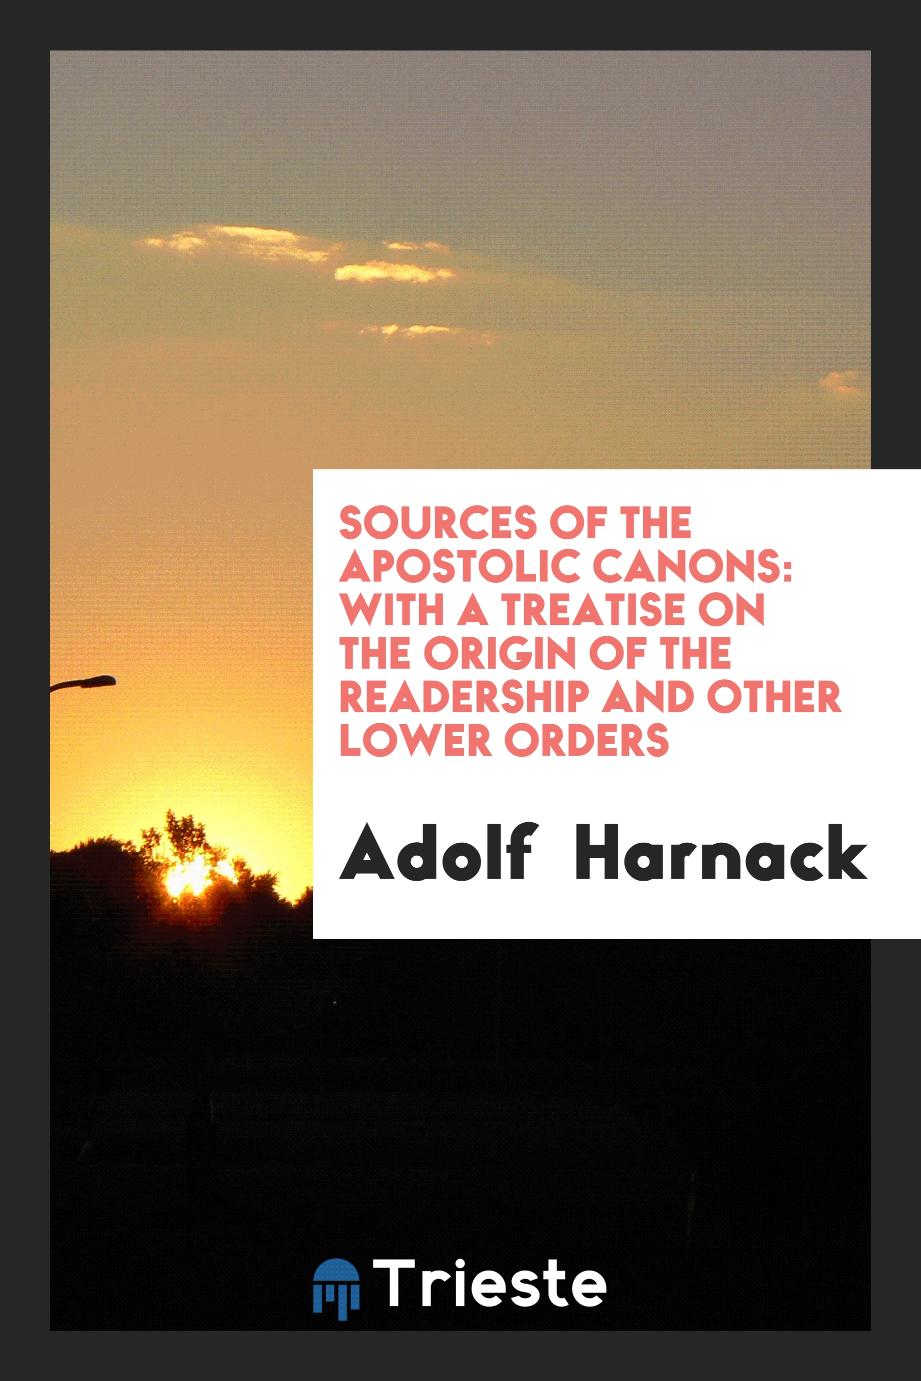 Sources of the Apostolic canons: with a treatise on the origin of the readership and other lower orders